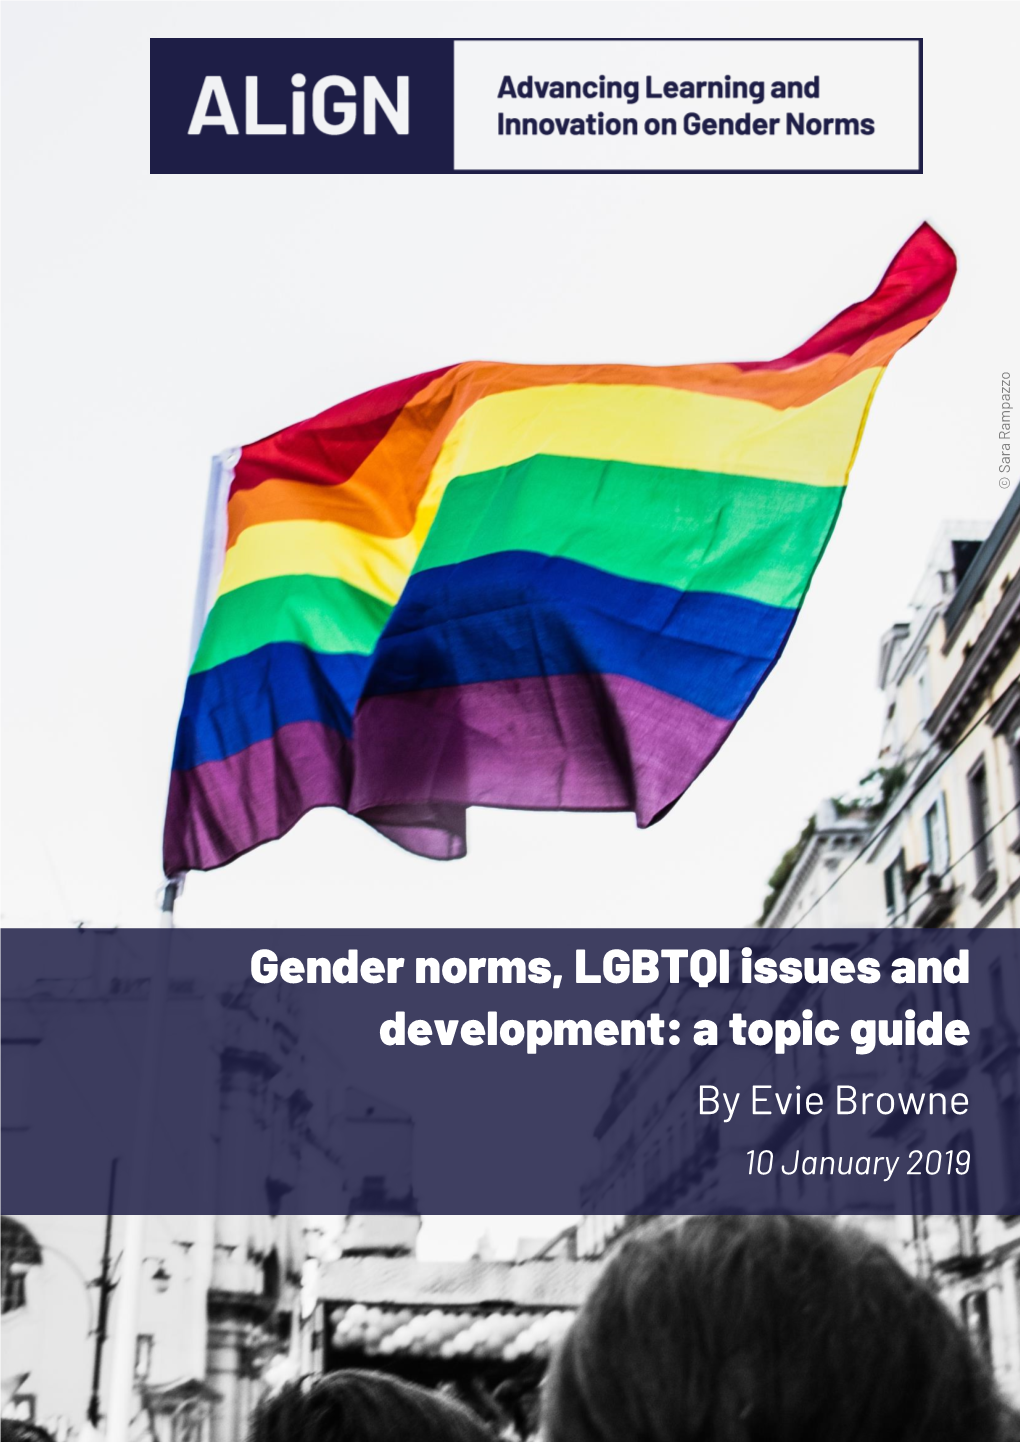 Gender Norms, LGBTQI Issues and Development: a Topic Guide by Evie Browne 10 January 2019